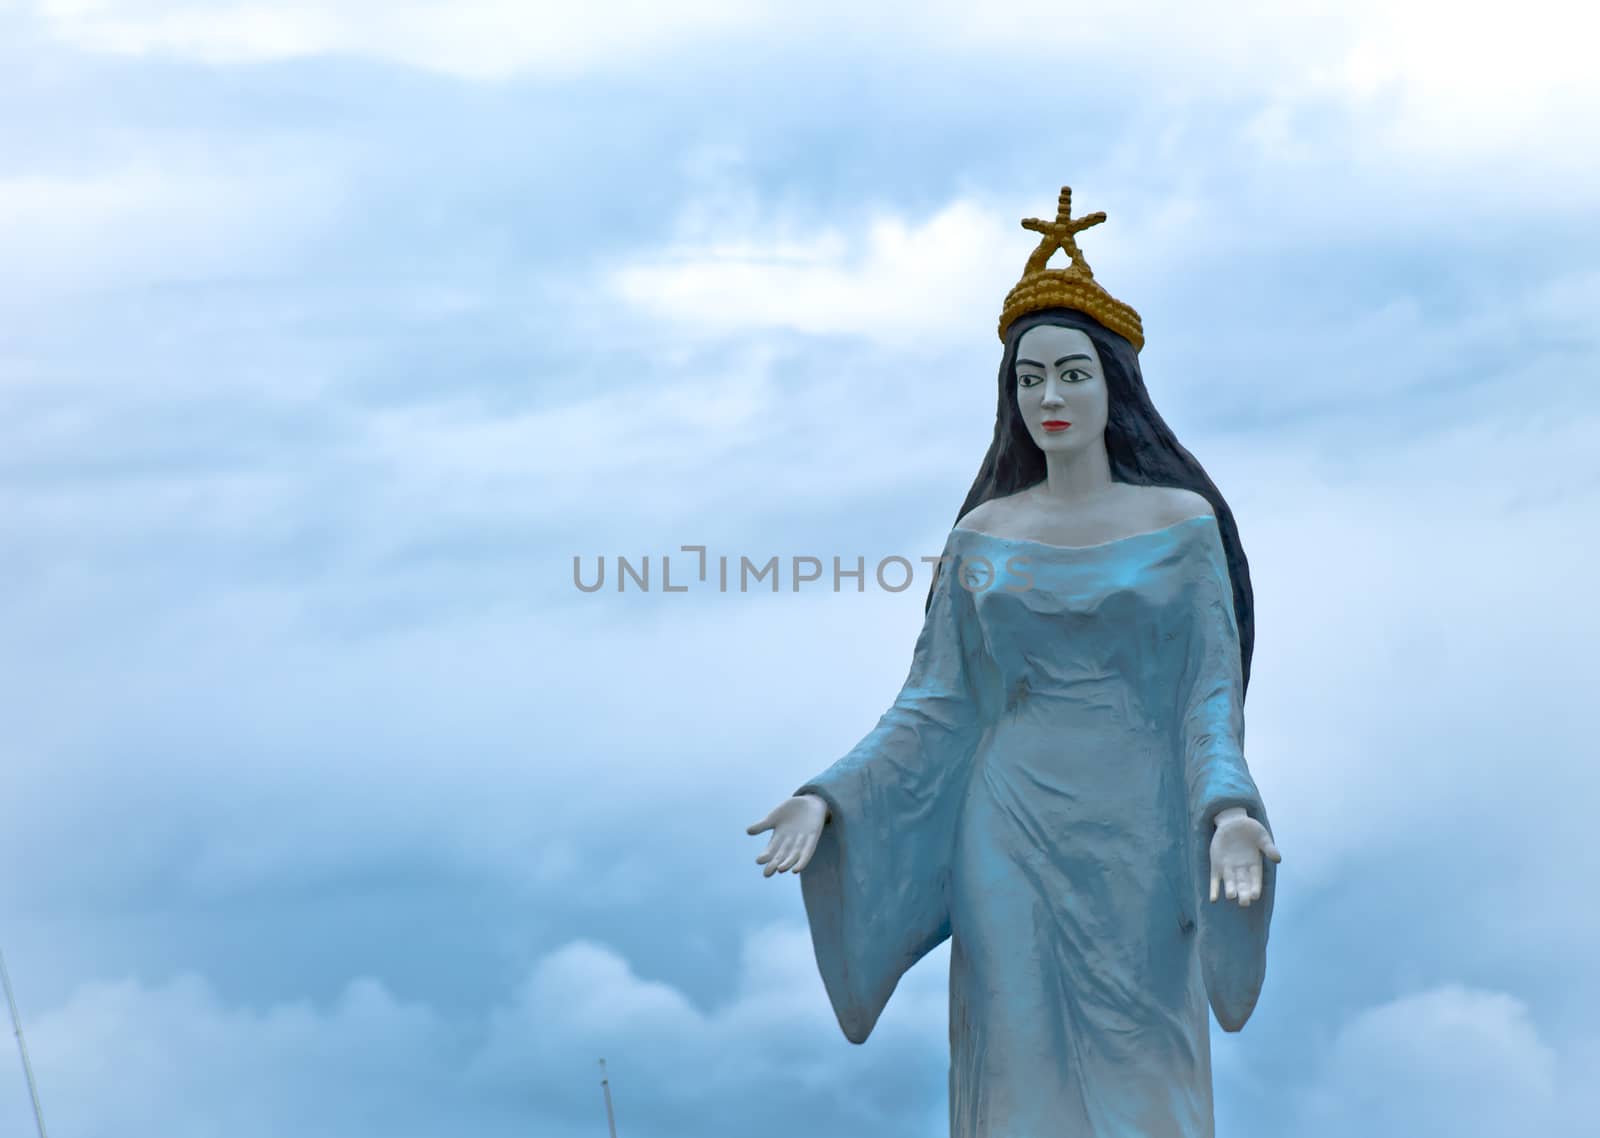 Statue of Iemanja with blue cloudy sky in the background